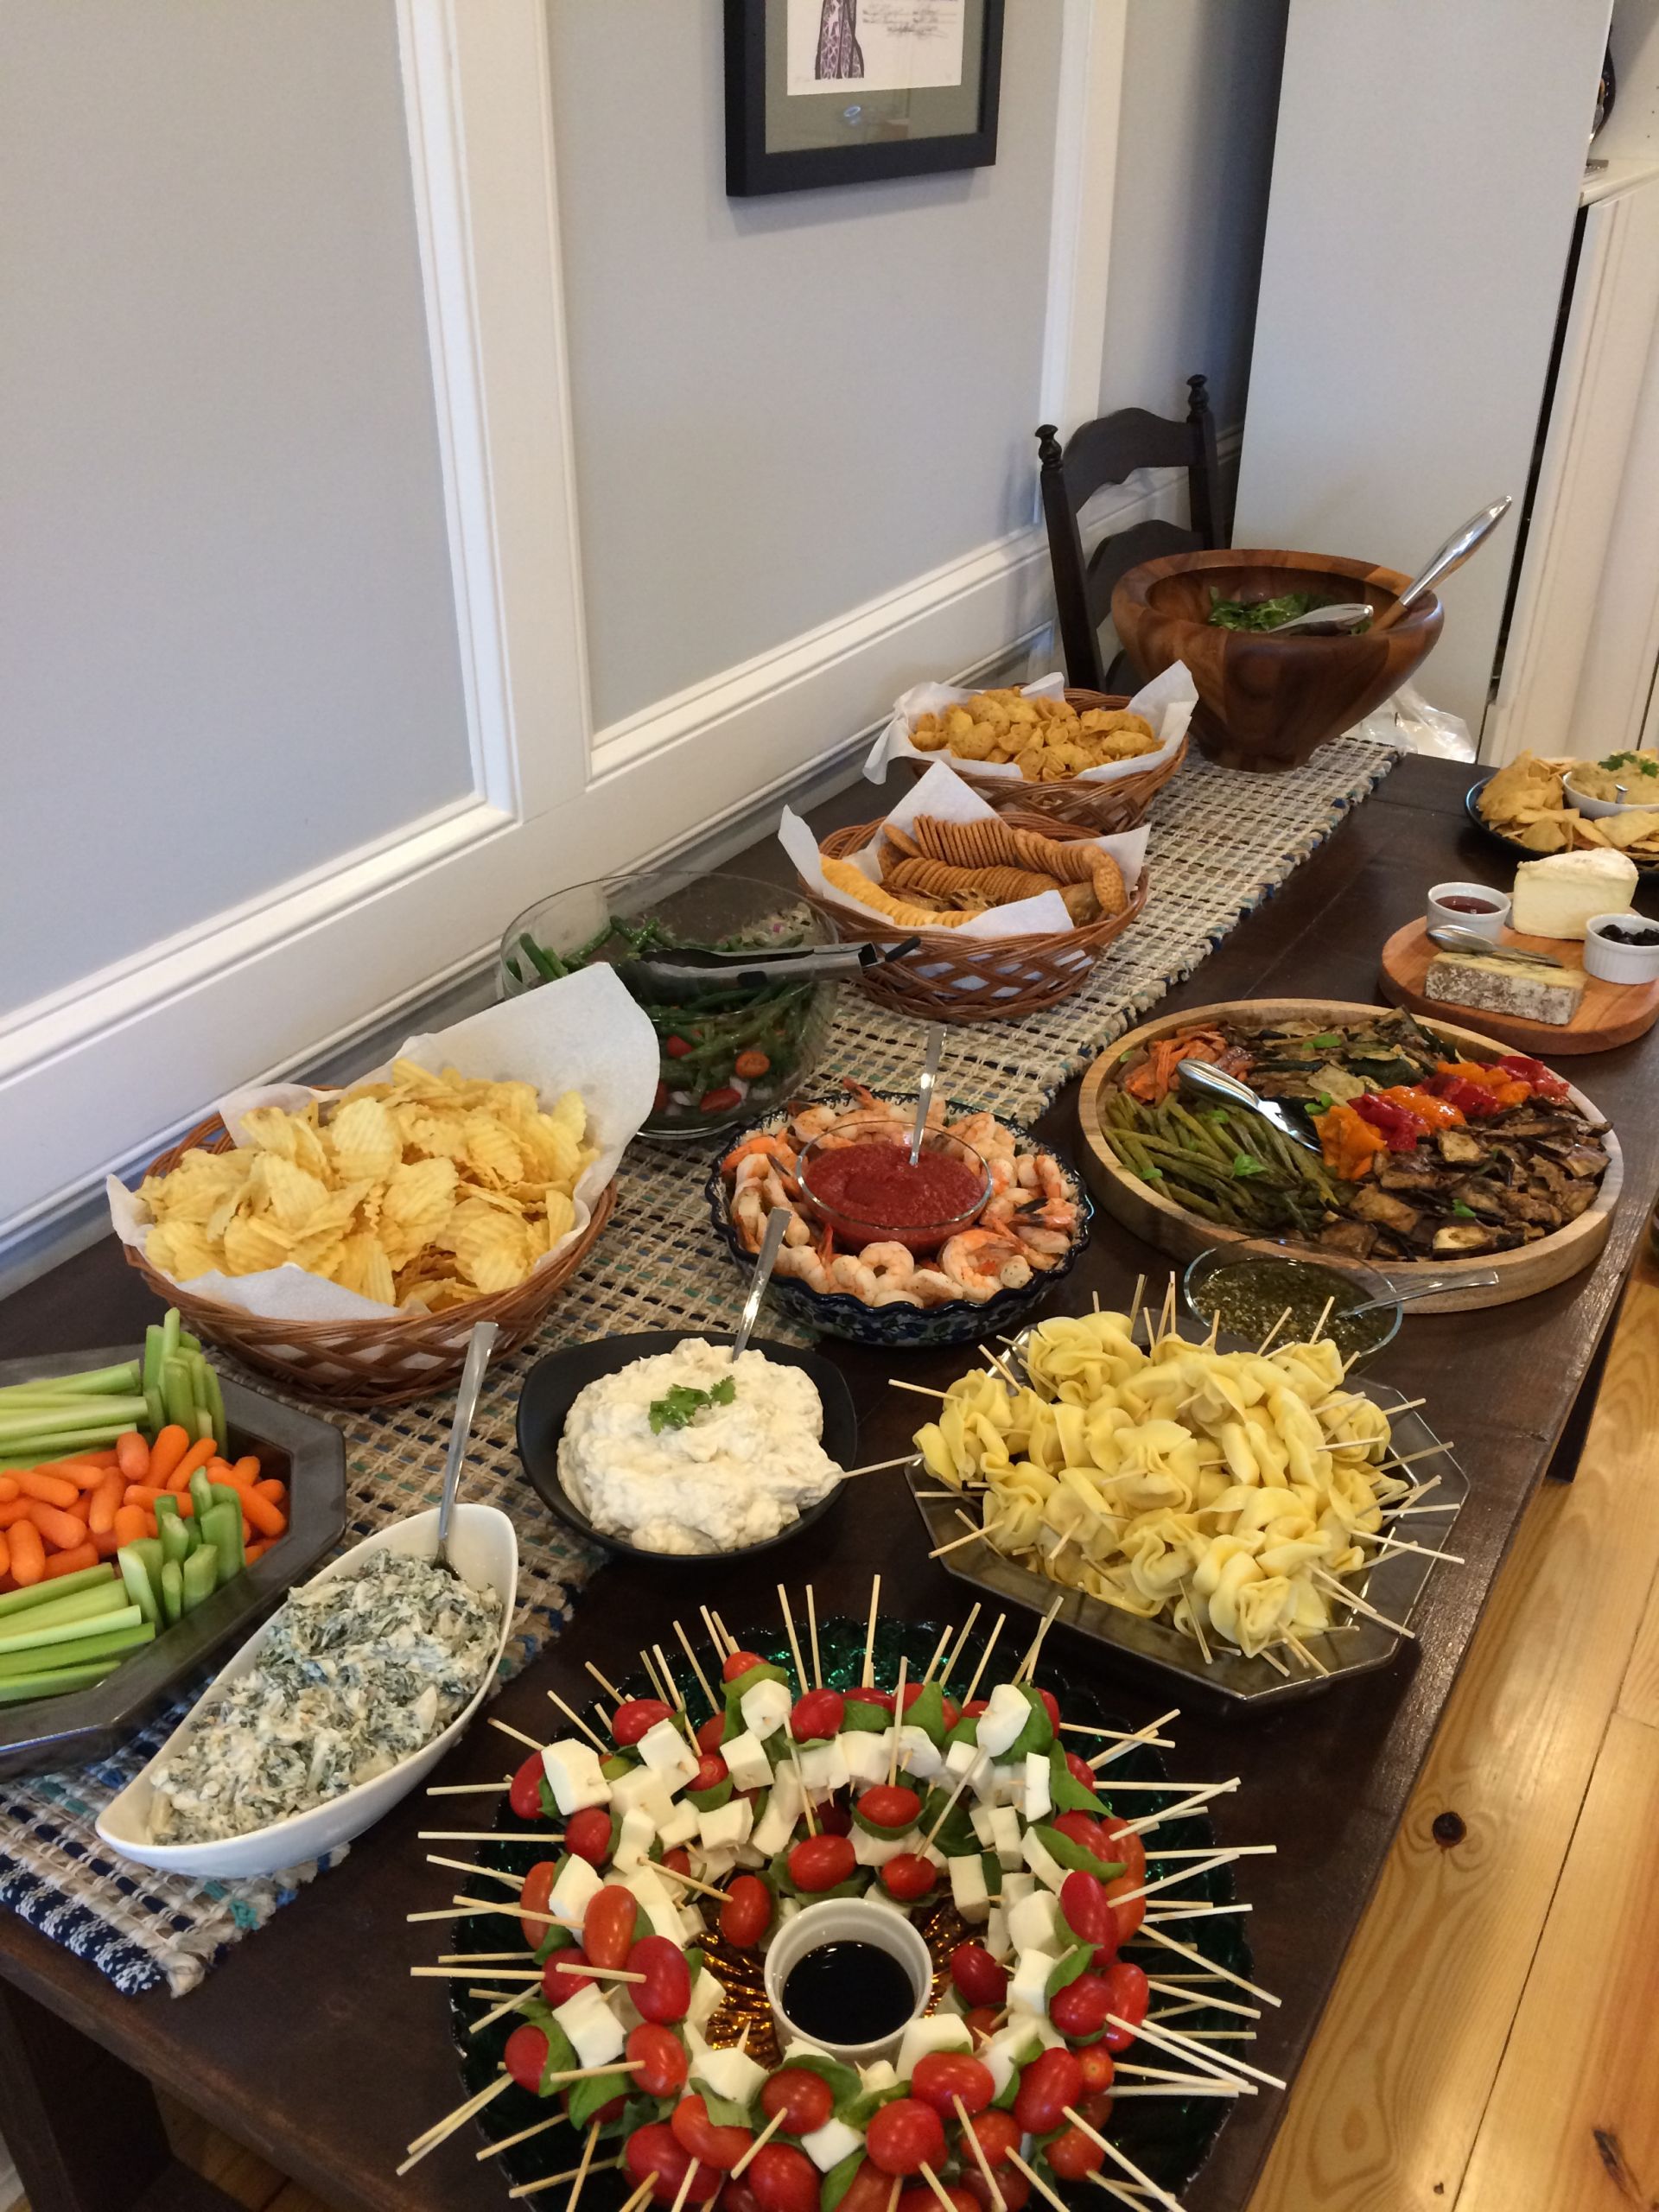 Great Food Ideas For Party
 Housewarming Party Spread